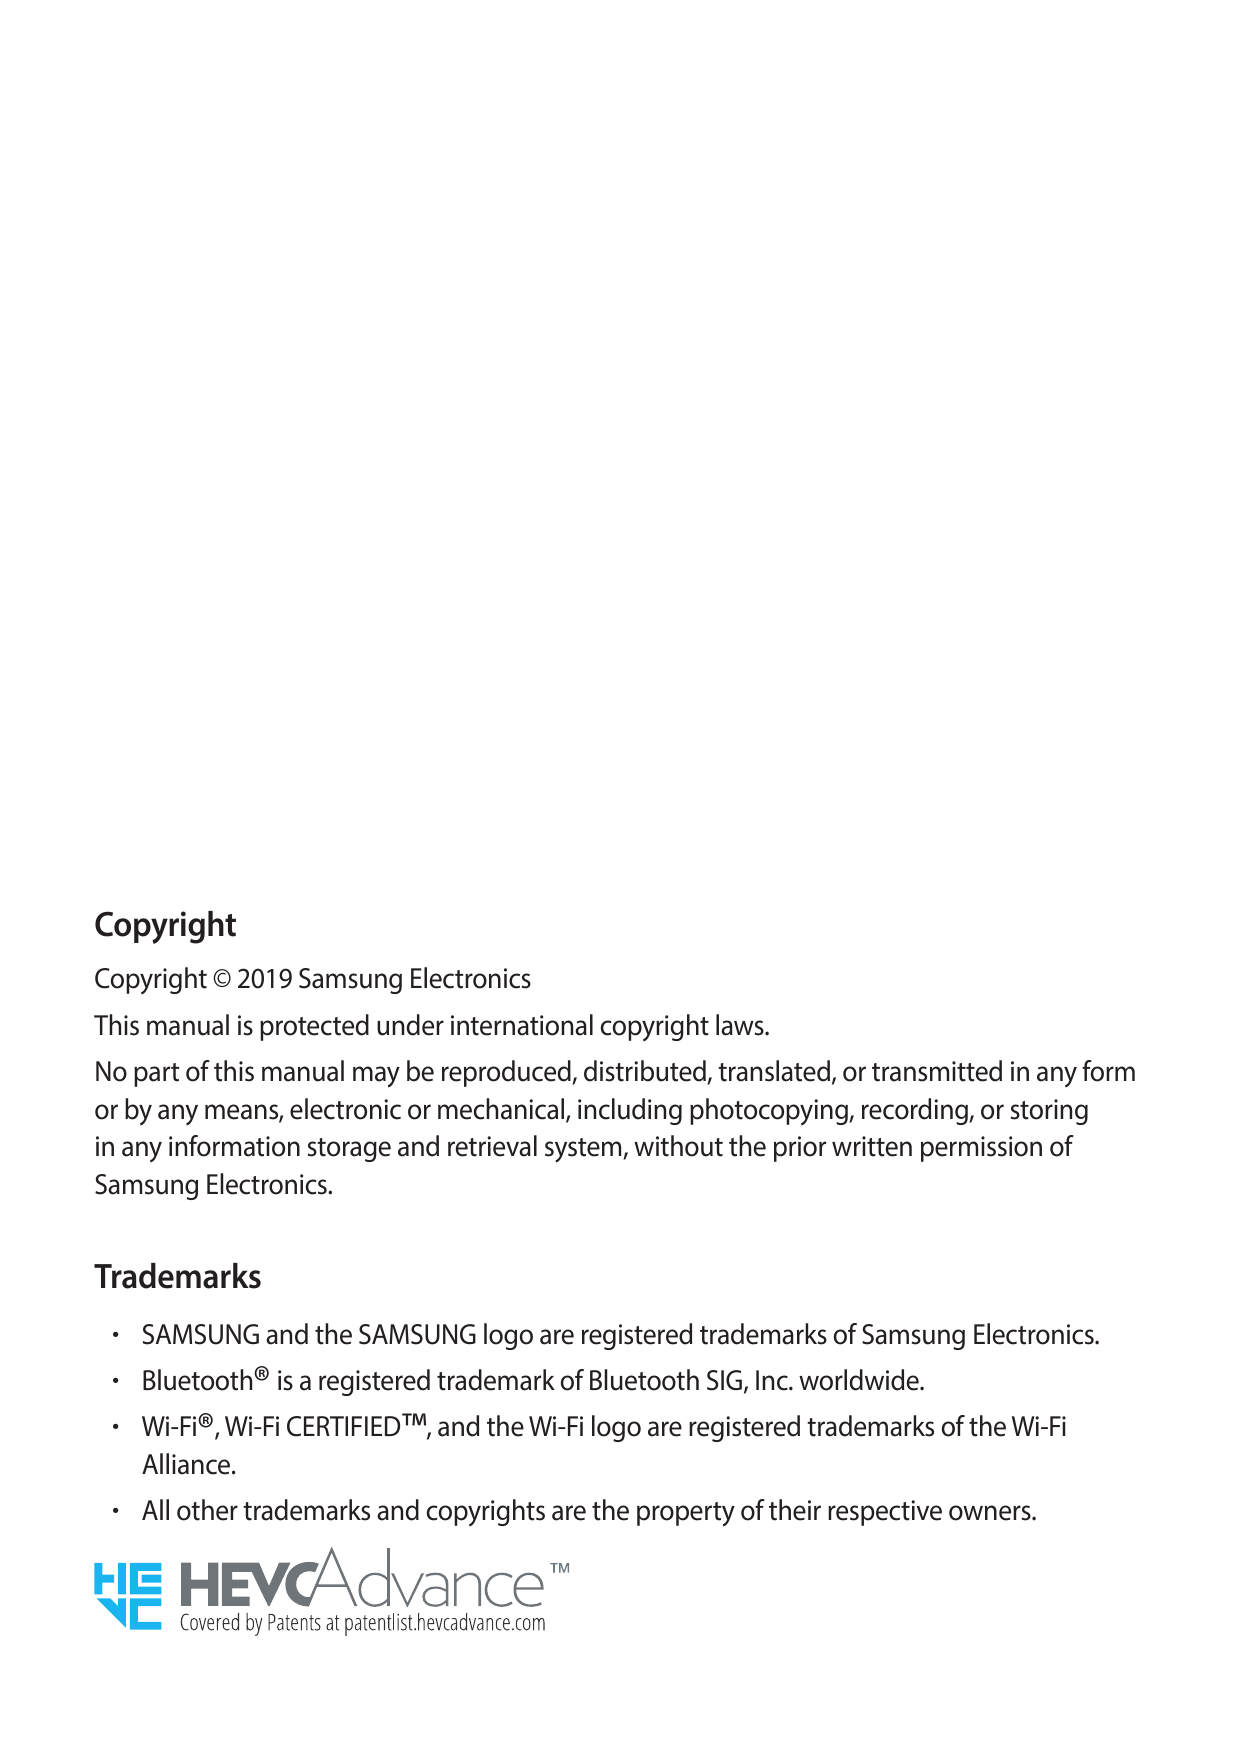 CopyrightCopyright © 2019 Samsung ElectronicsThis manual is protected under international copyright laws.No part of this manual 